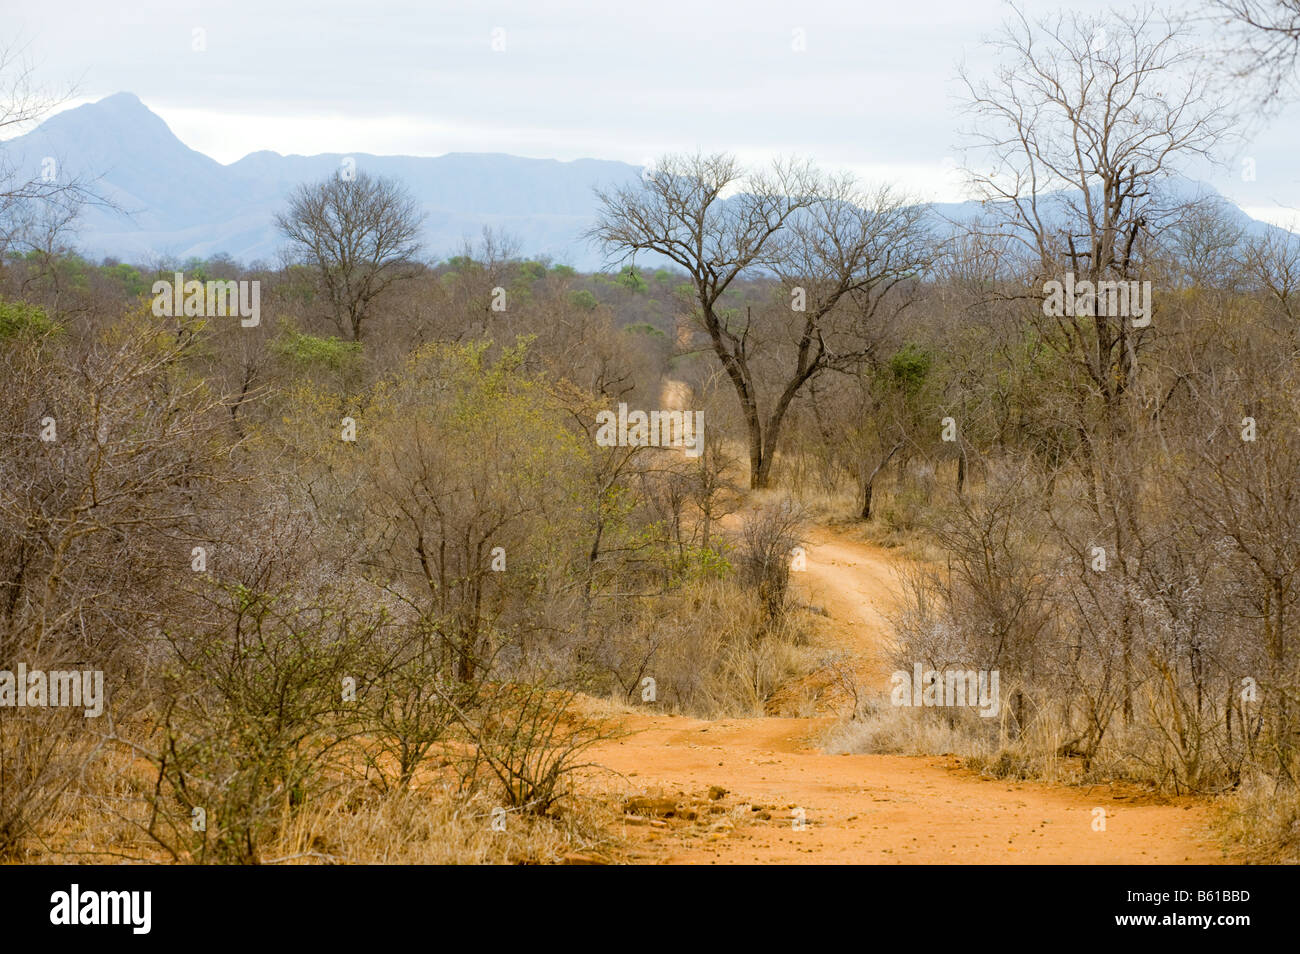 wide view landscape south africa desert red dust dirt road drive way safari savannah woodland bush bushland dryness dry periode Stock Photo